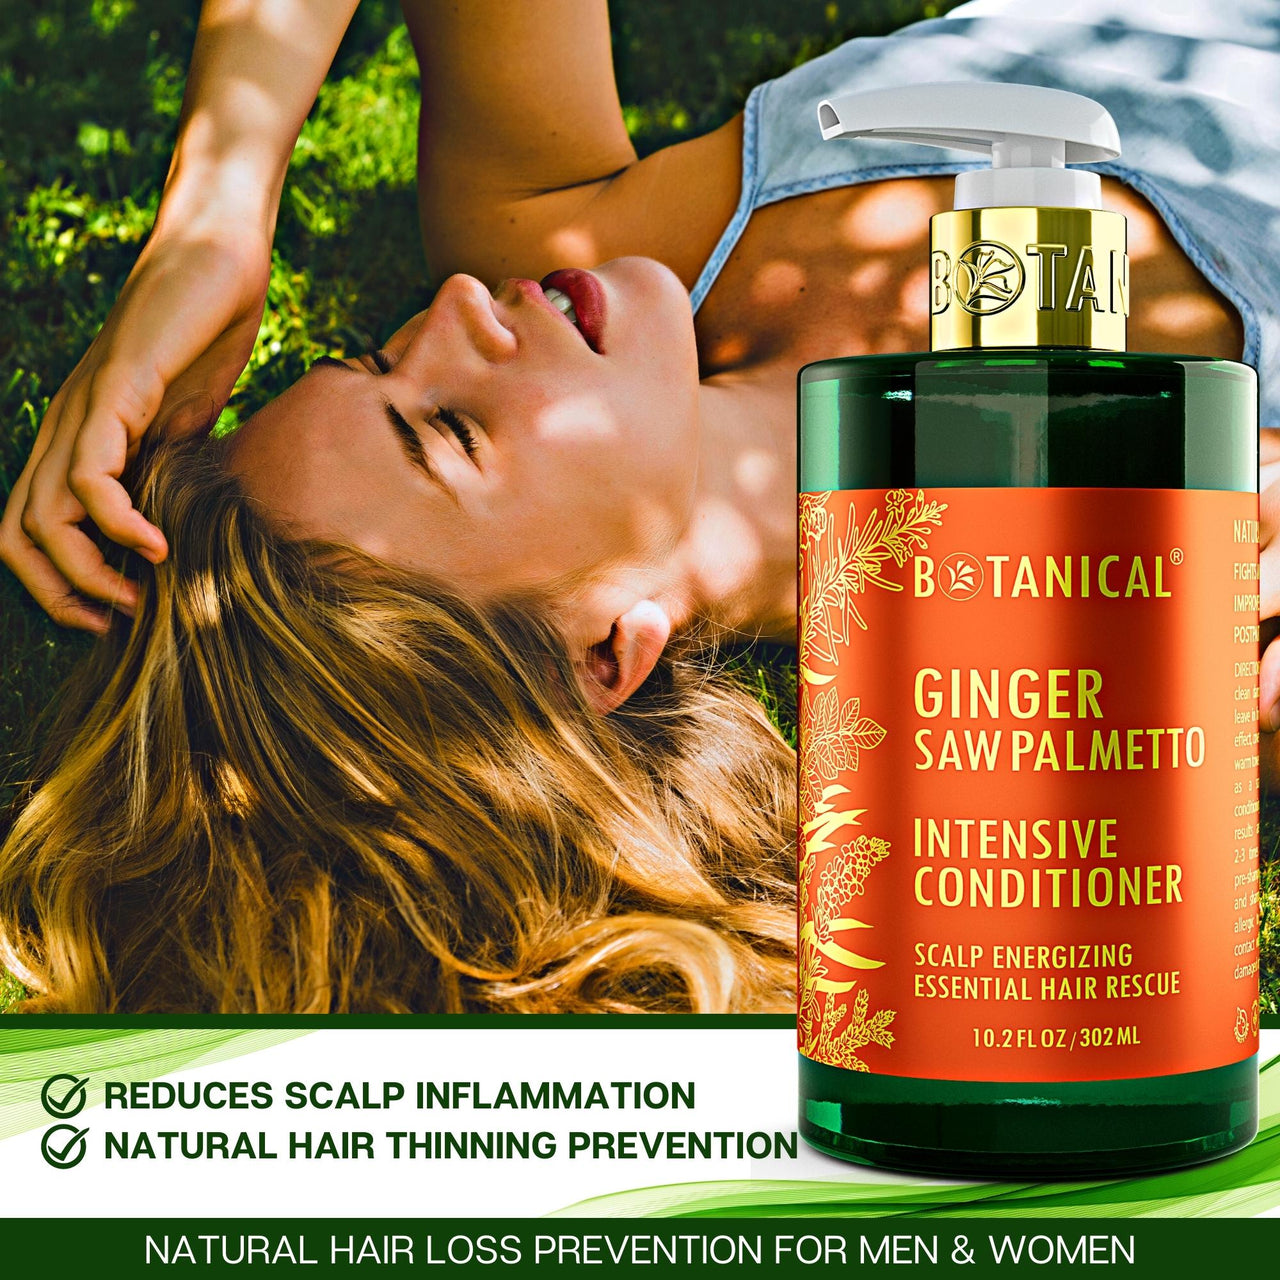 ESSENTIAL RESCUE™ - INTENSIVE CONDITIONER SCALP ENERGIZING / GINGER & SAW PALMETTO